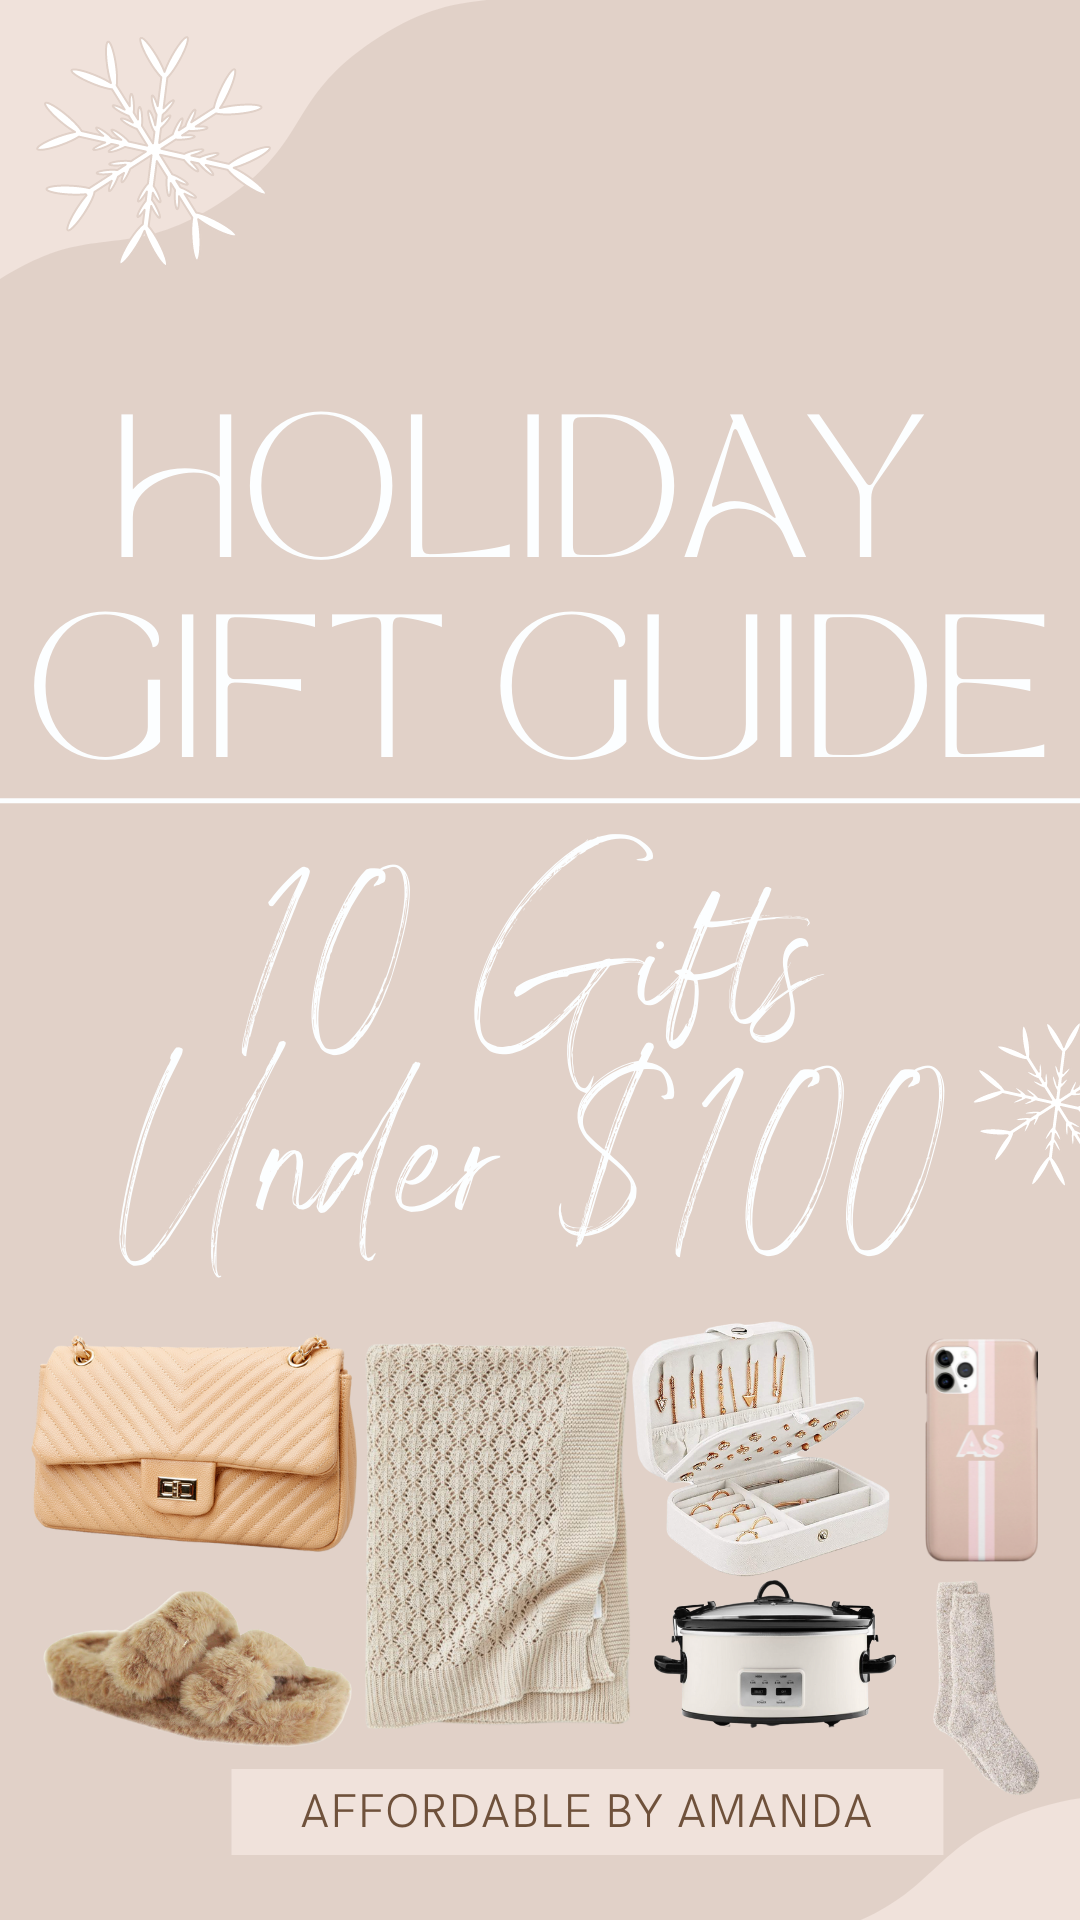 Best Holiday Gifts Under $100 - 10 Gifts Under $100 - Affordable by Amanda - Holiday Gift Guide